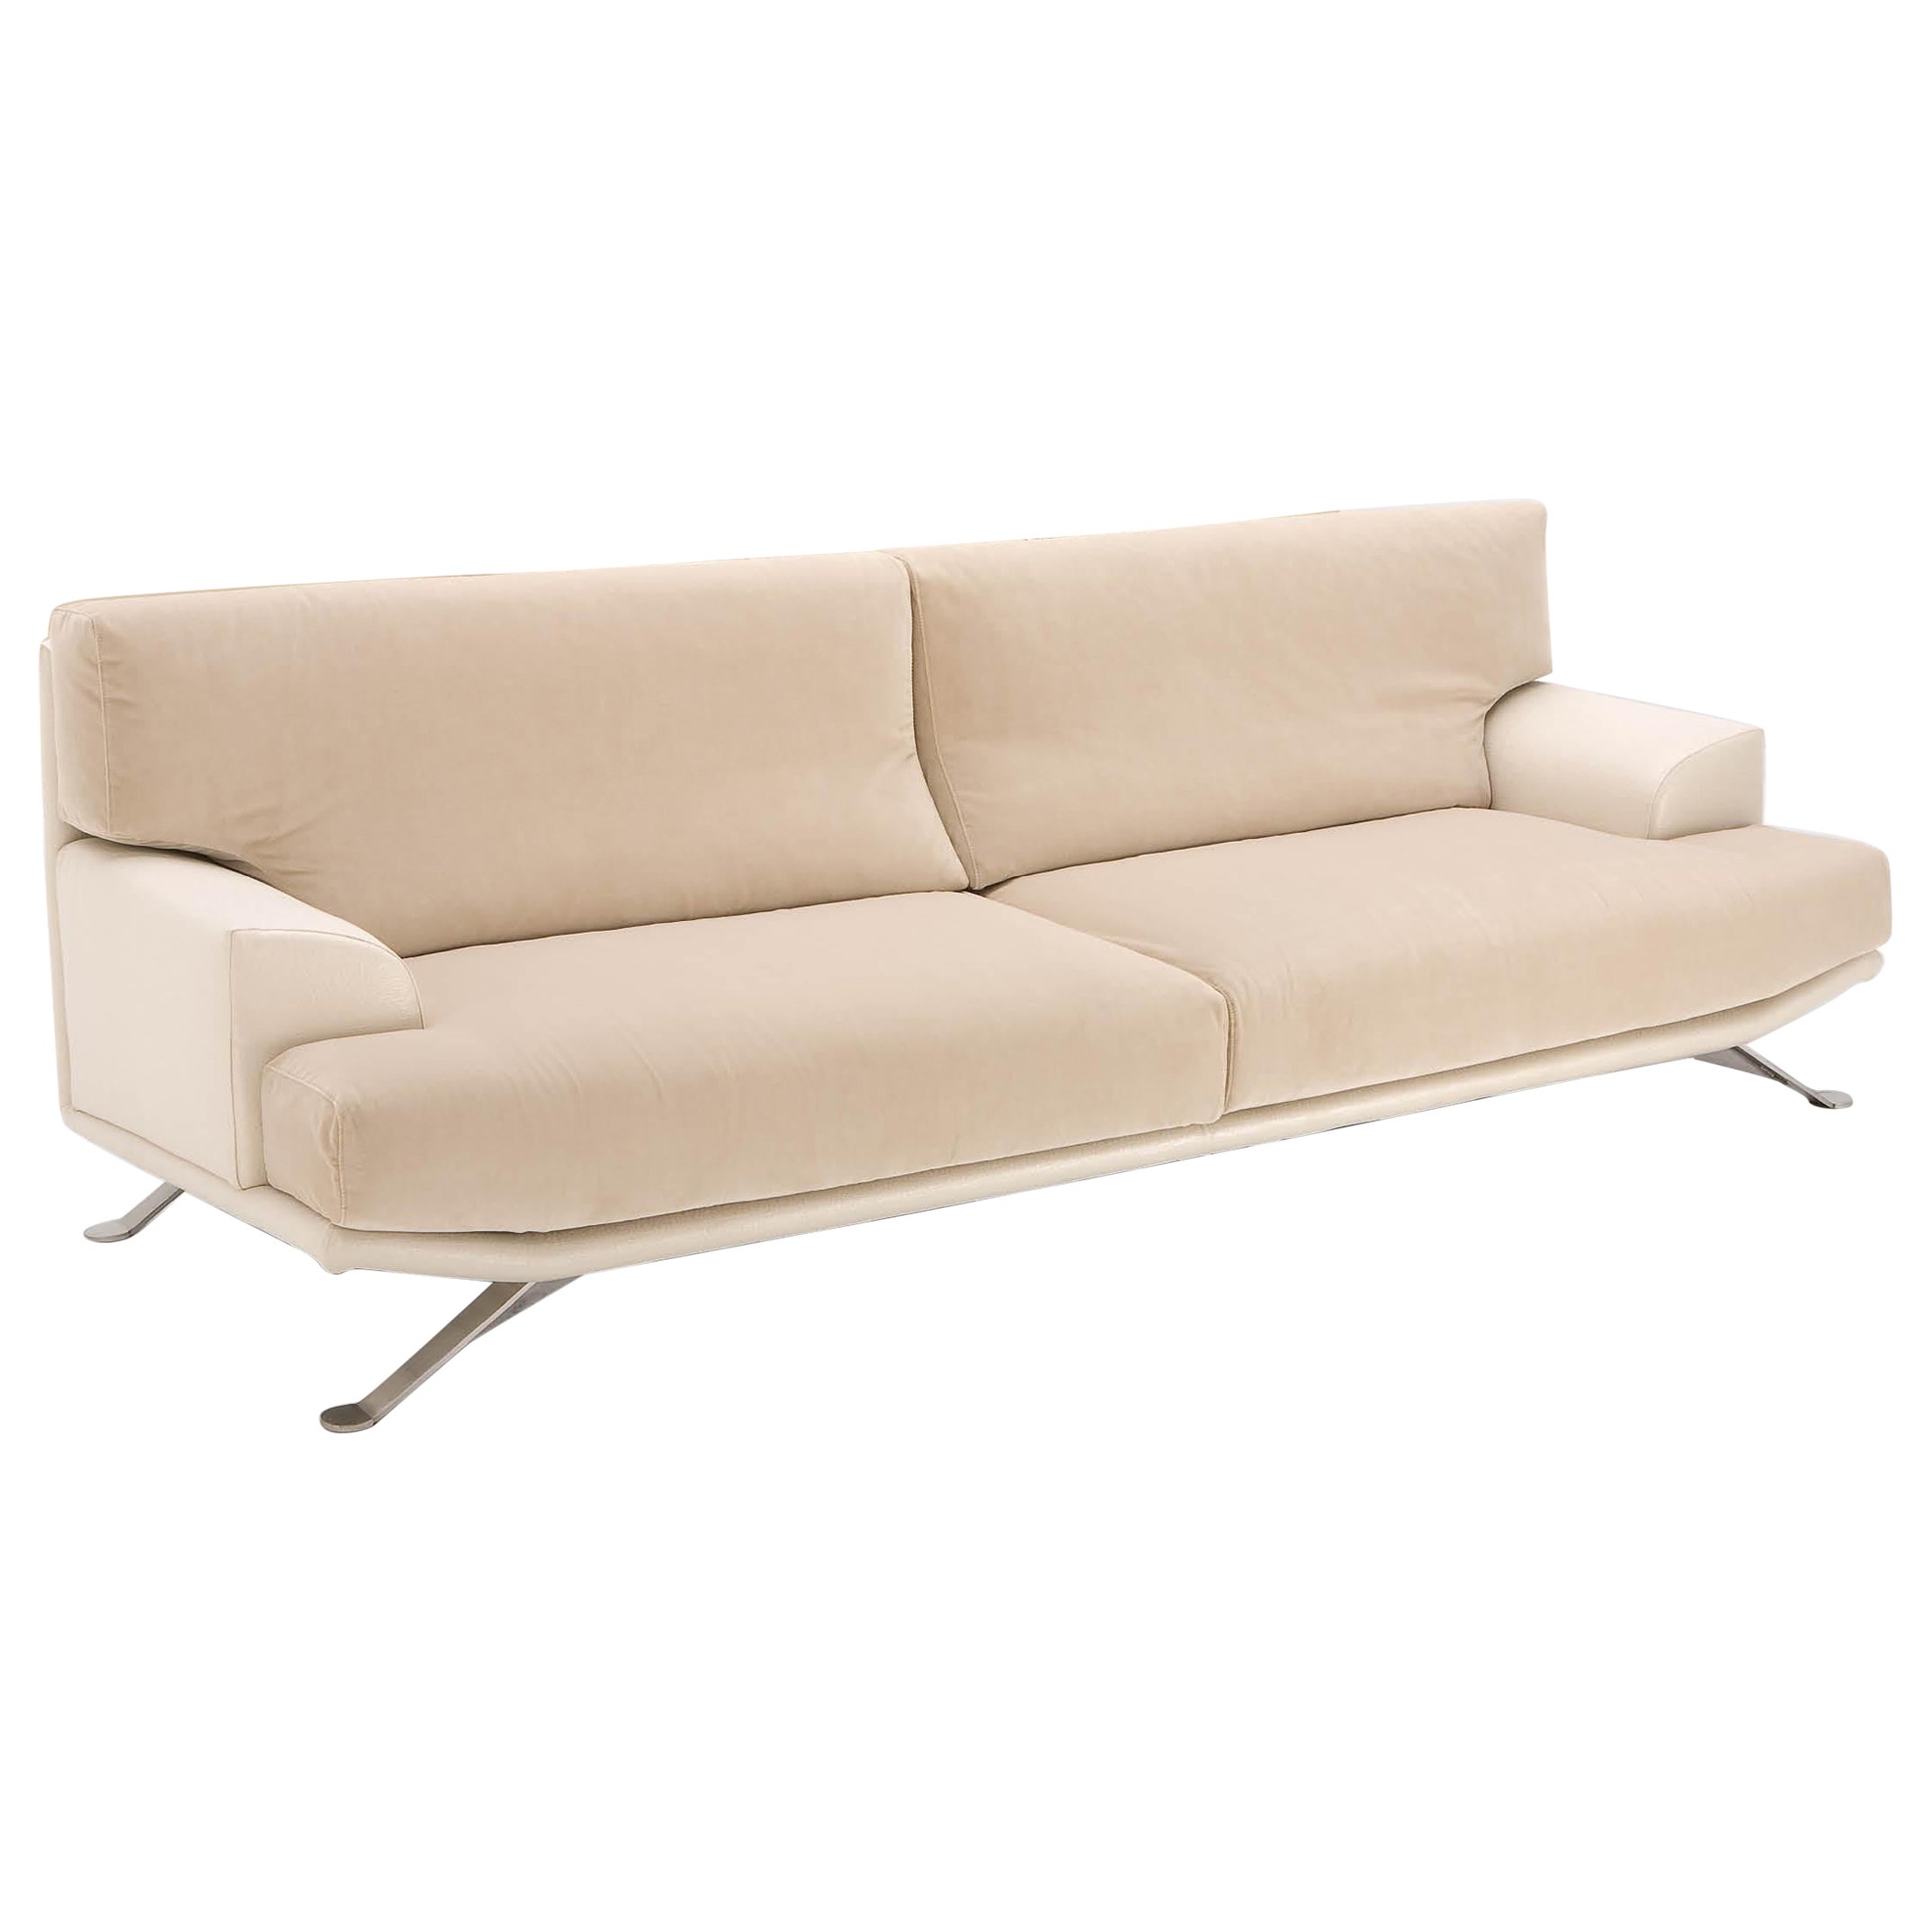 Giovannetti, Contemporary 2 Seater Sofa from the 1970s by P. Piva Cream "Boss" For Sale